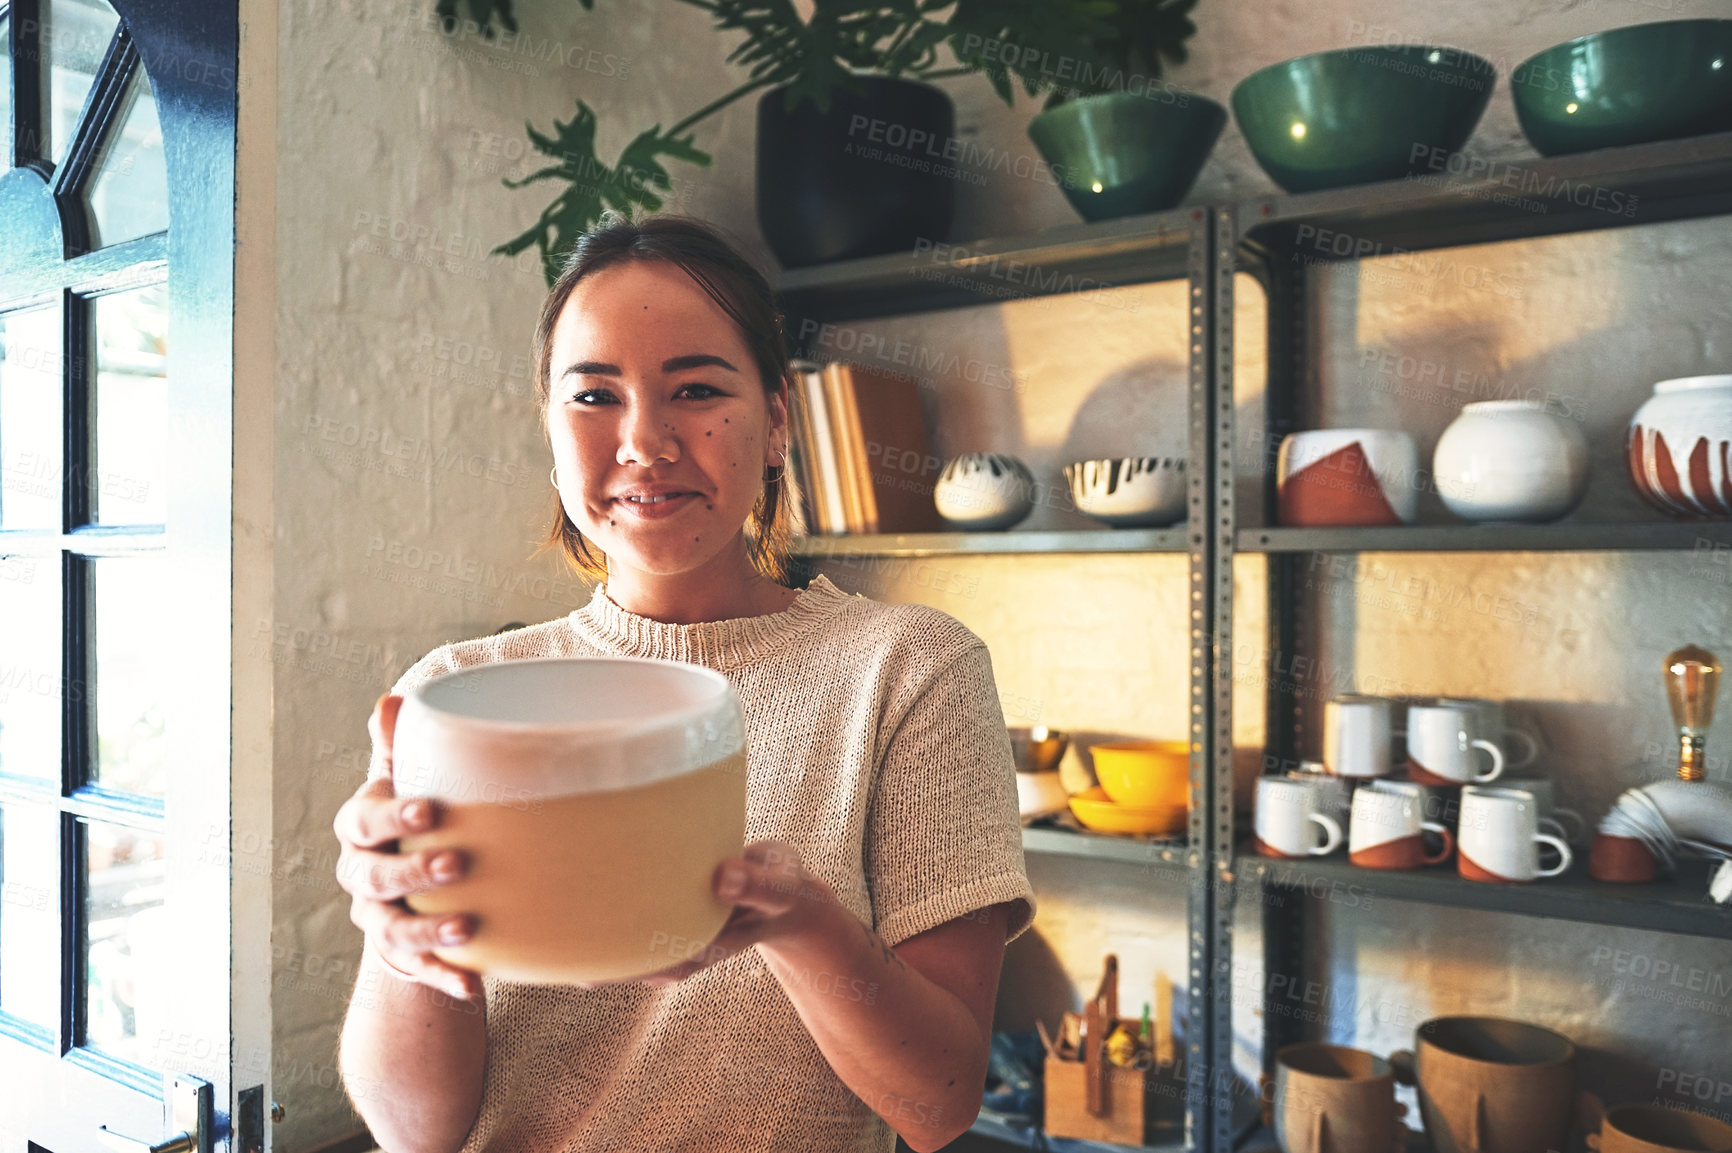 Buy stock photo Cropped portrait of an attractive young business owner standing alone and holding a clay pot in her pottery studio